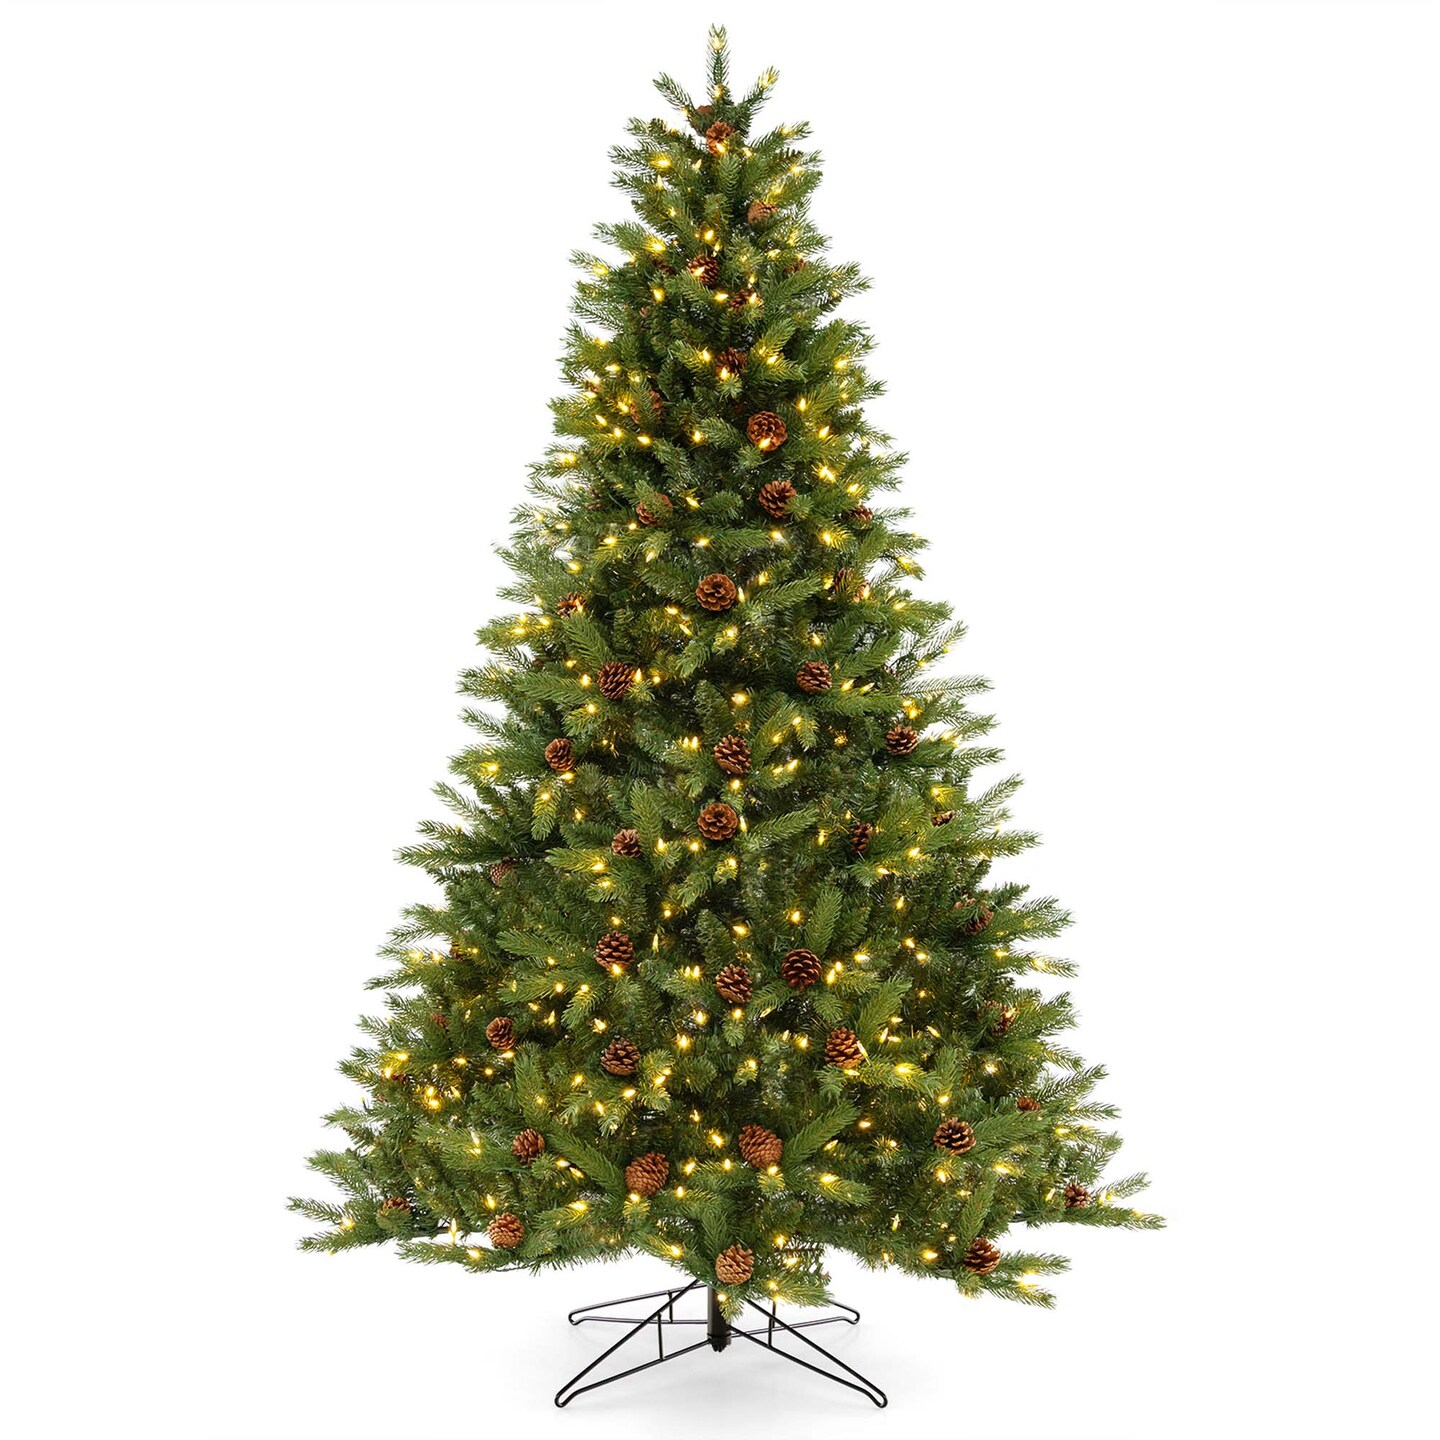 Costway 7 FT Pre-Lit Christmas Tree 3-Minute Quick Shape with Quick Power Connector Timer